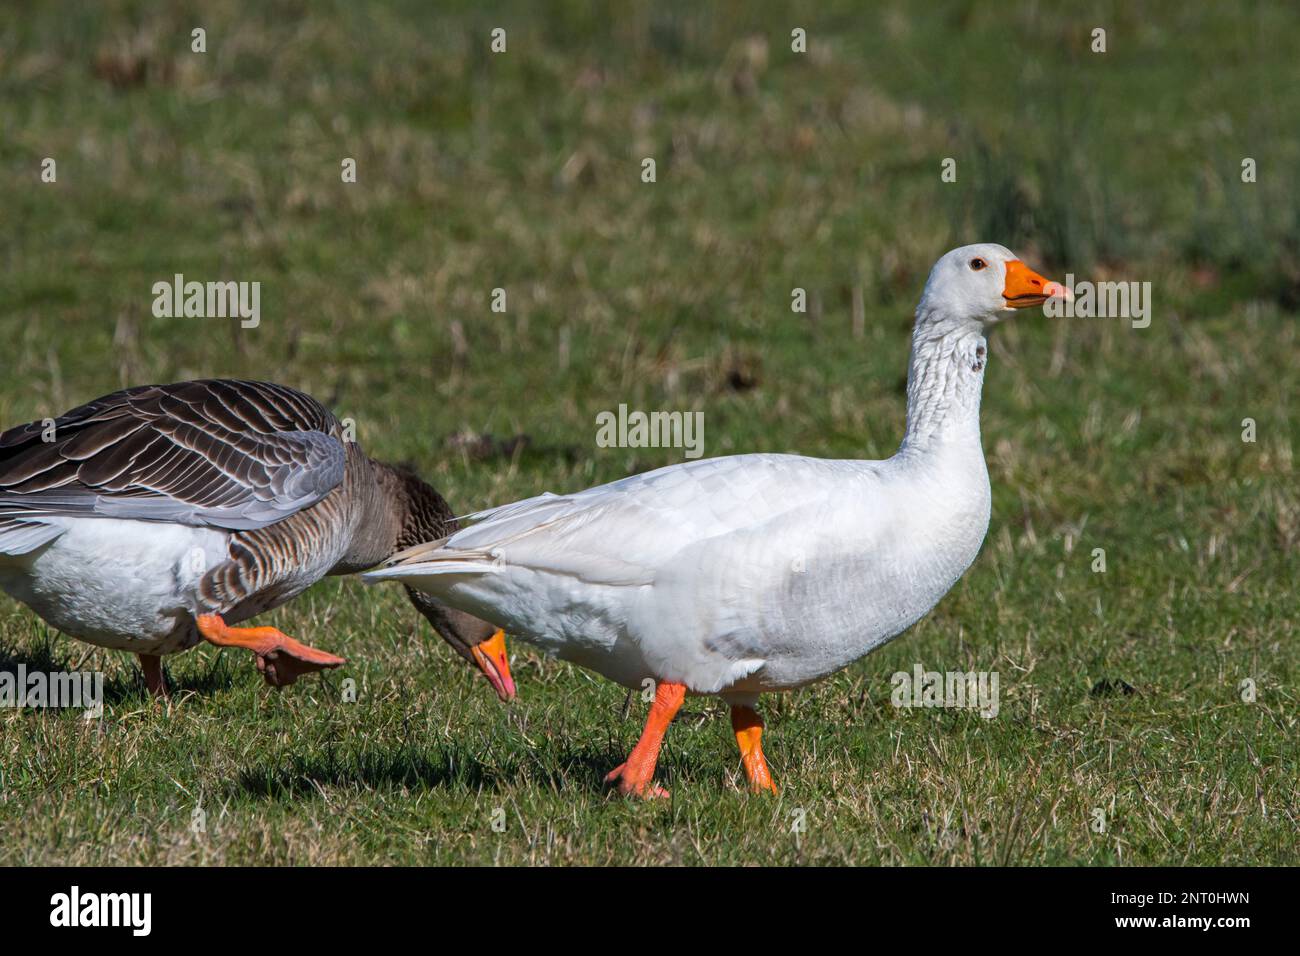 Escaped Emden goose / Embden, German breed of white domestic goose foraging in grassland with greylag goose / graylag geese (Anser anser) in winter Stock Photo